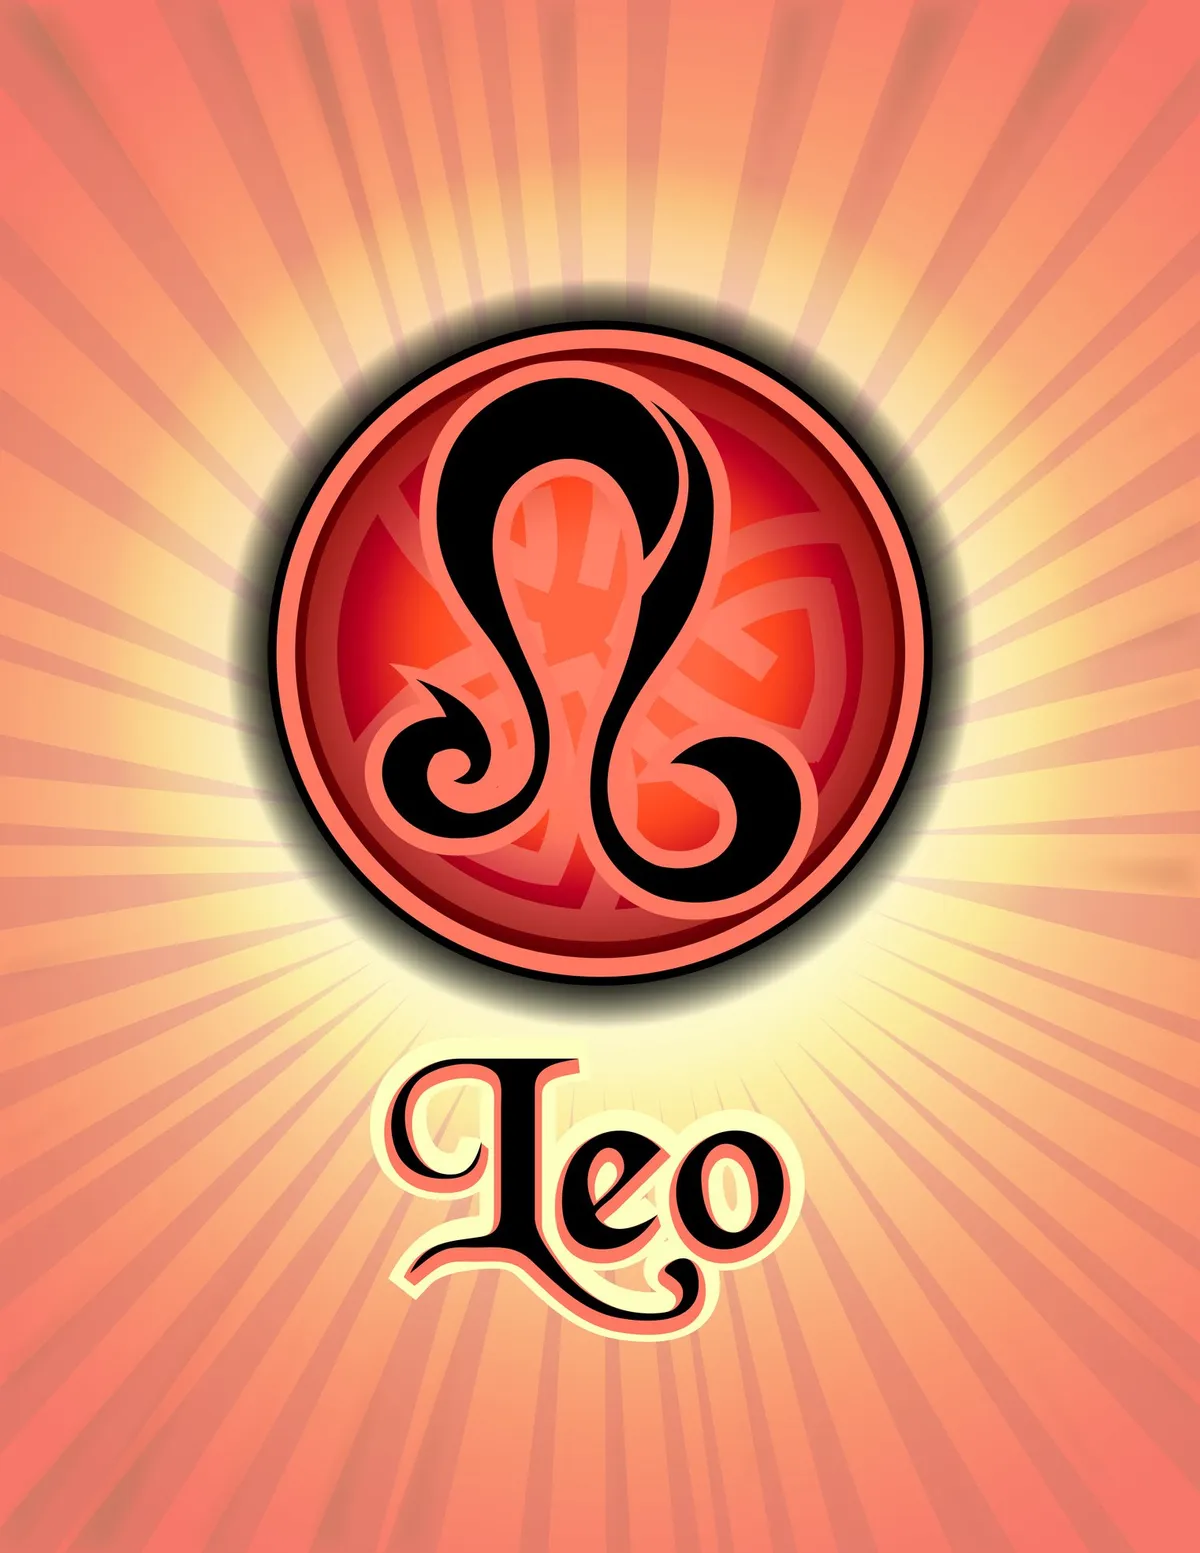 Astrology Leo Zodiac with Red Glow | Photo: Getty Images